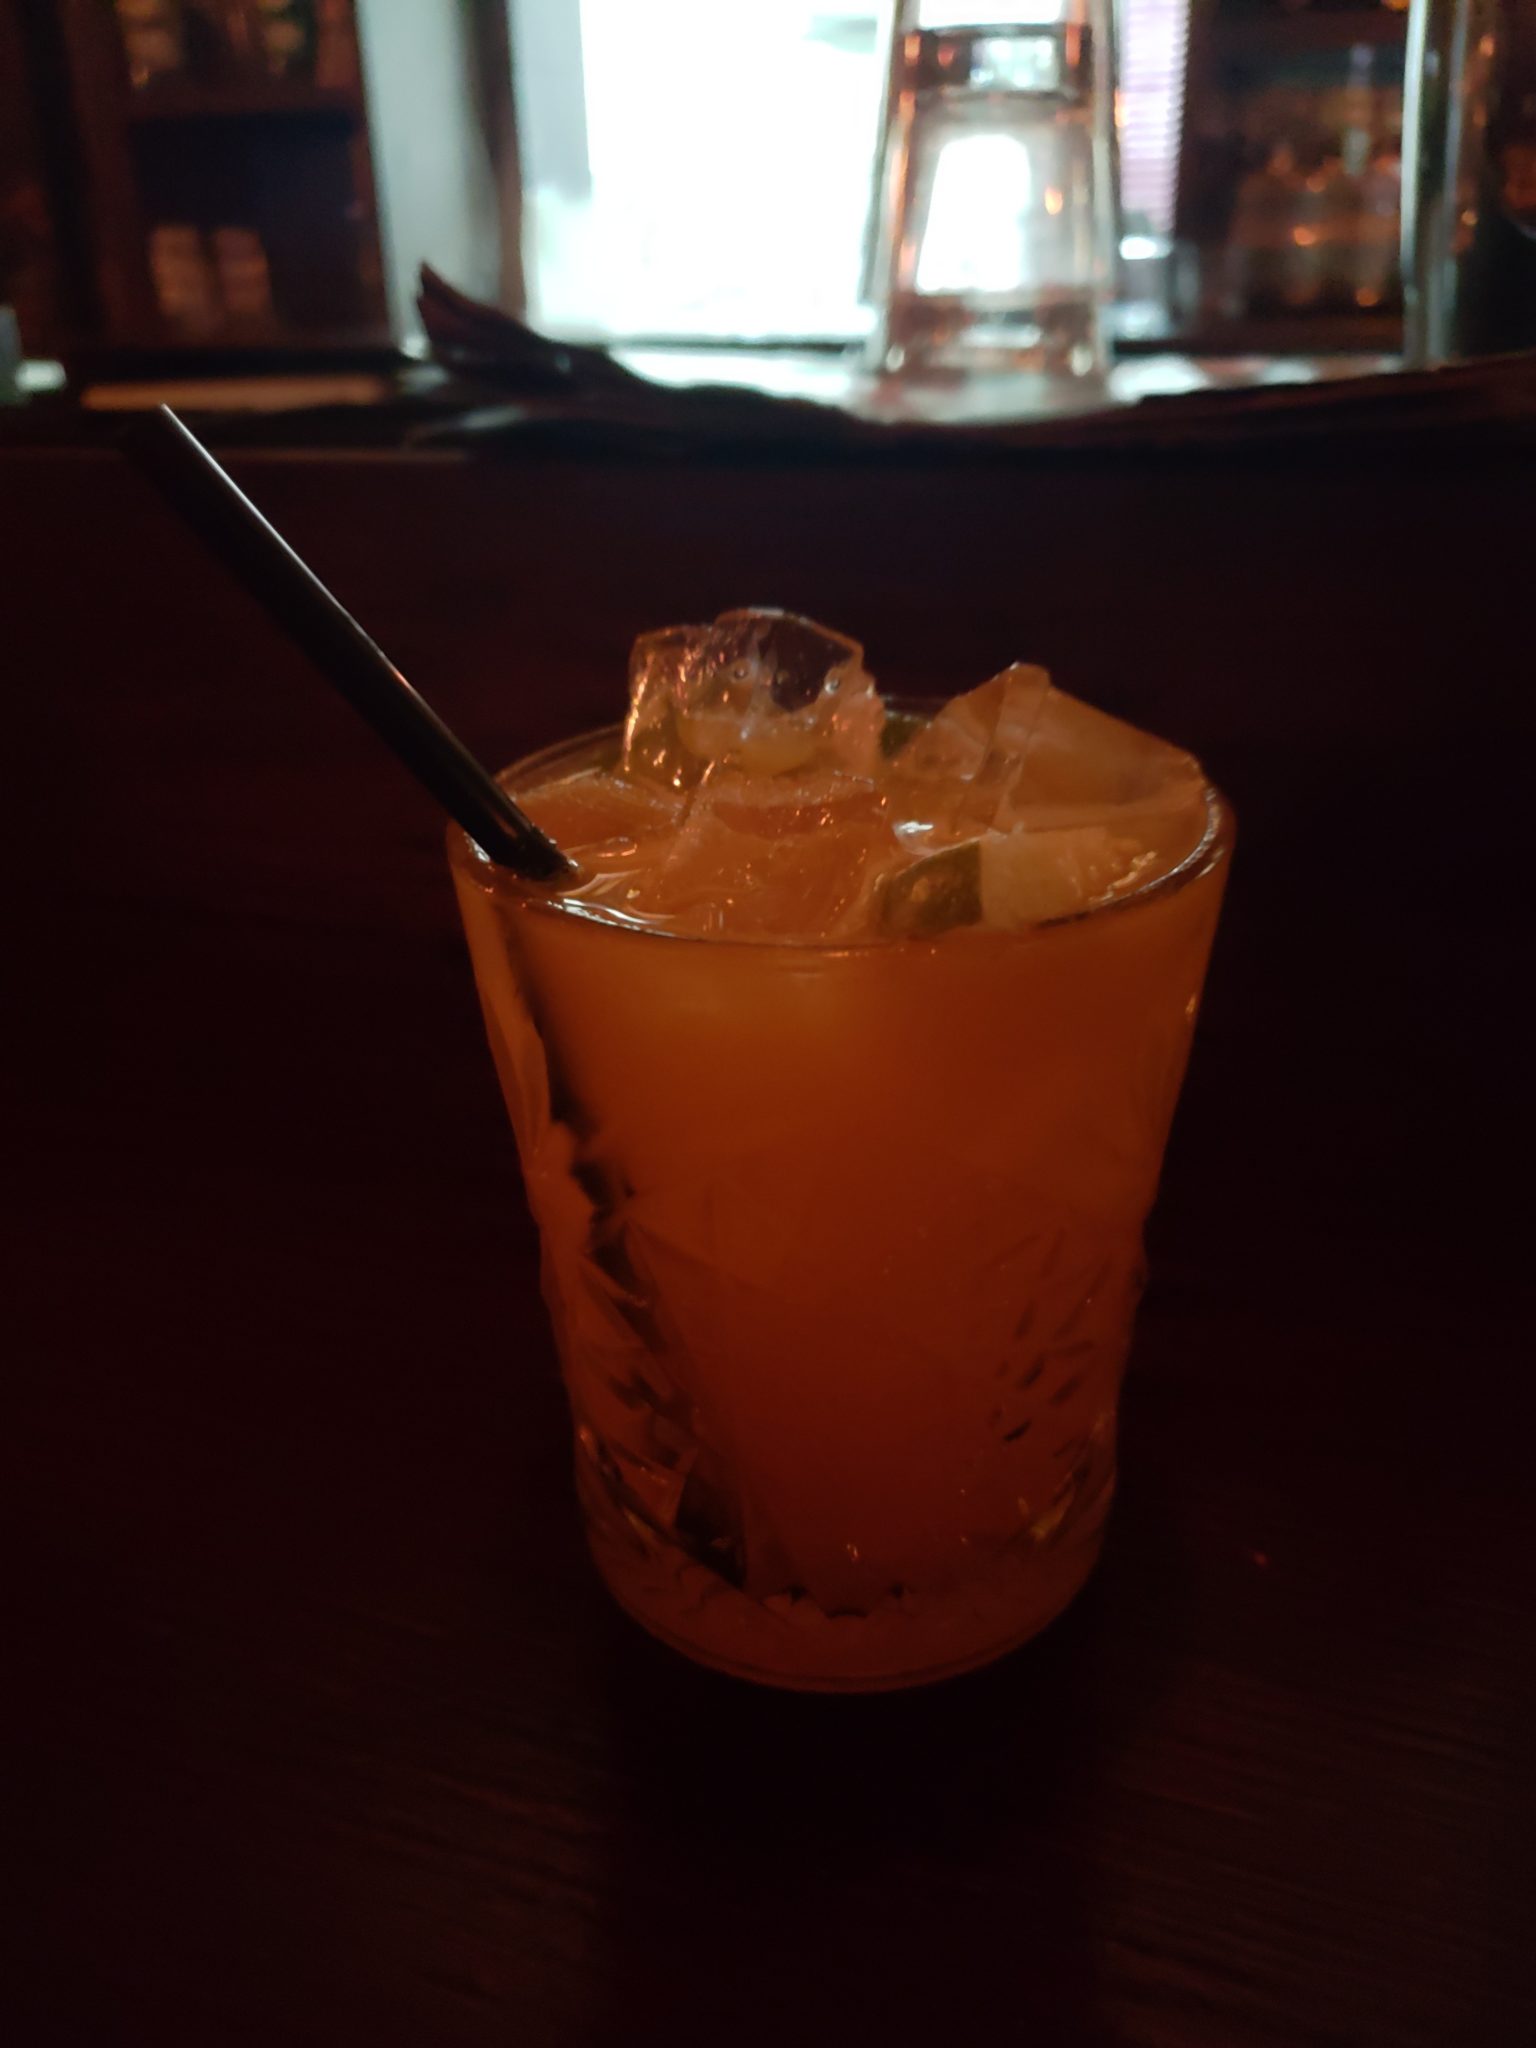 a glass of orange liquid with ice and a straw